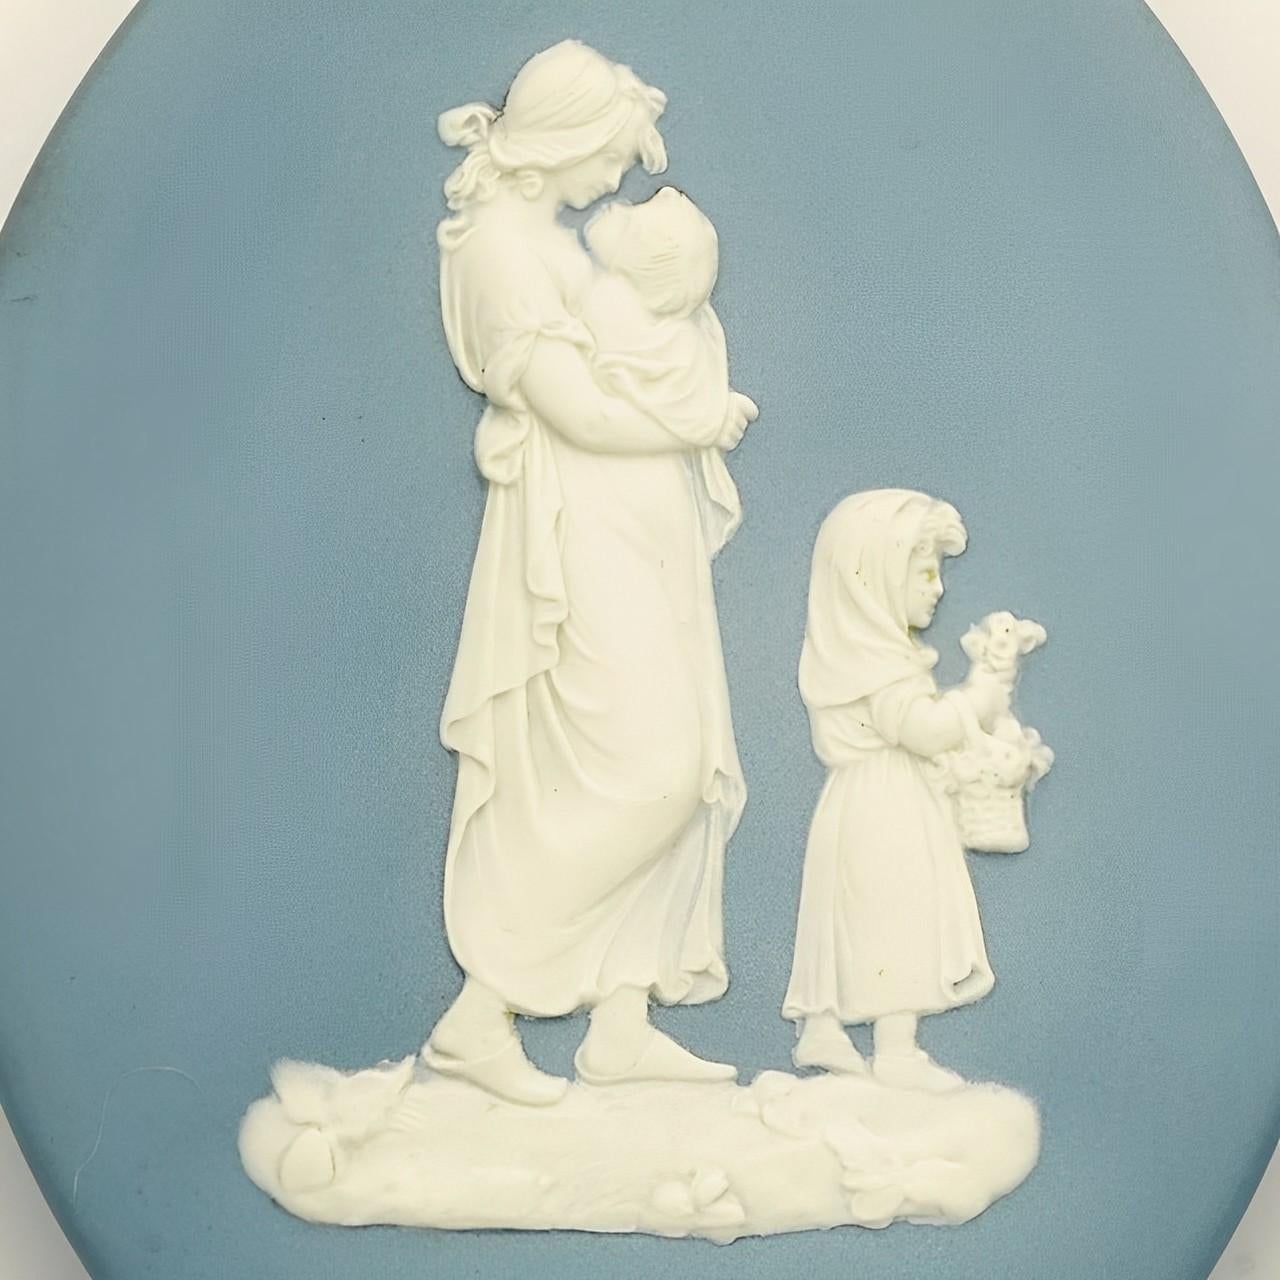 
Beautiful Wedgwood pair of blue and white jasperware pram plaques, featuring classical relief mother and child figures.  Measuring height 11.8 cm / 4.6 inches, width 9.2 cm / 3.6 inches, and depth 1.6 cm / .6 inch. We have given the plaques a light